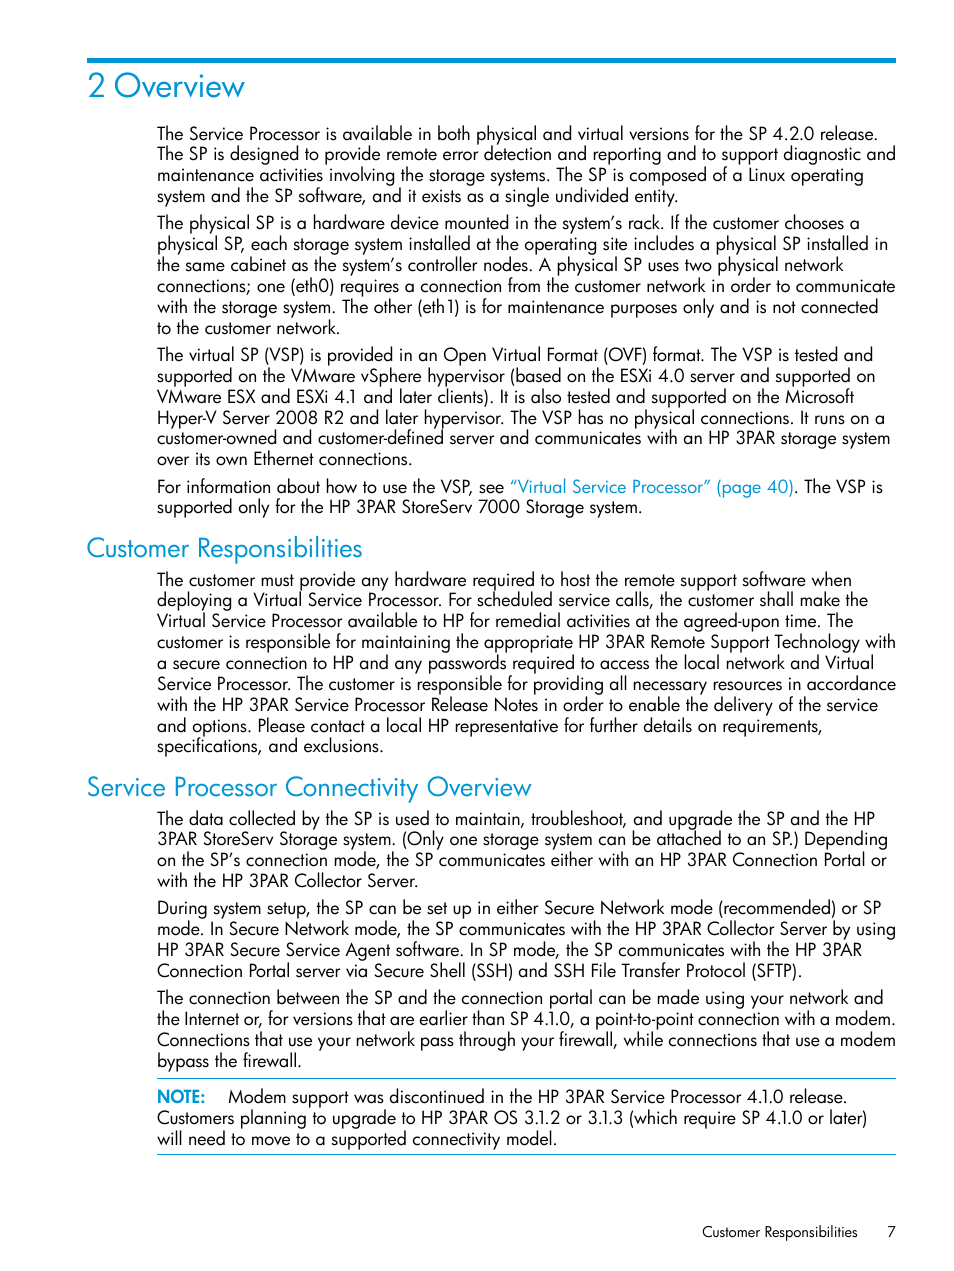 2 overview, Customer responsibilities, Service processor connectivity overview | HP 3PAR Service Processors User Manual | Page 7 / 51